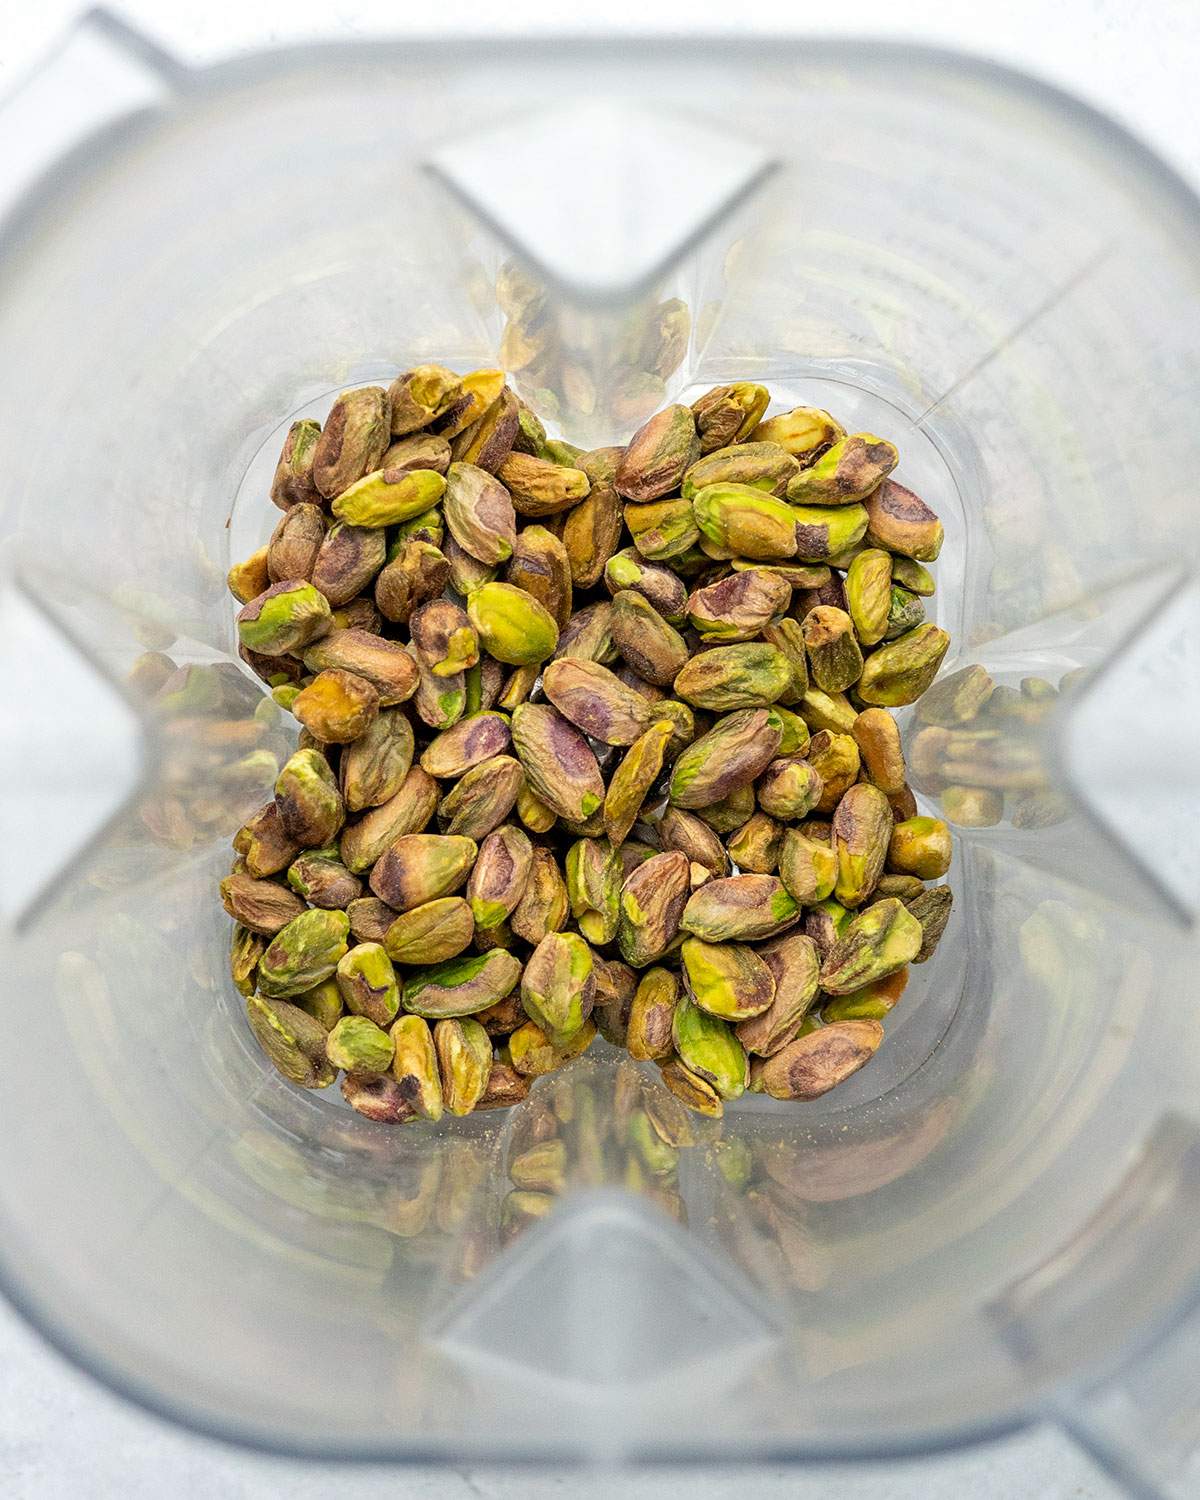 Roasted pistachios in a blender.